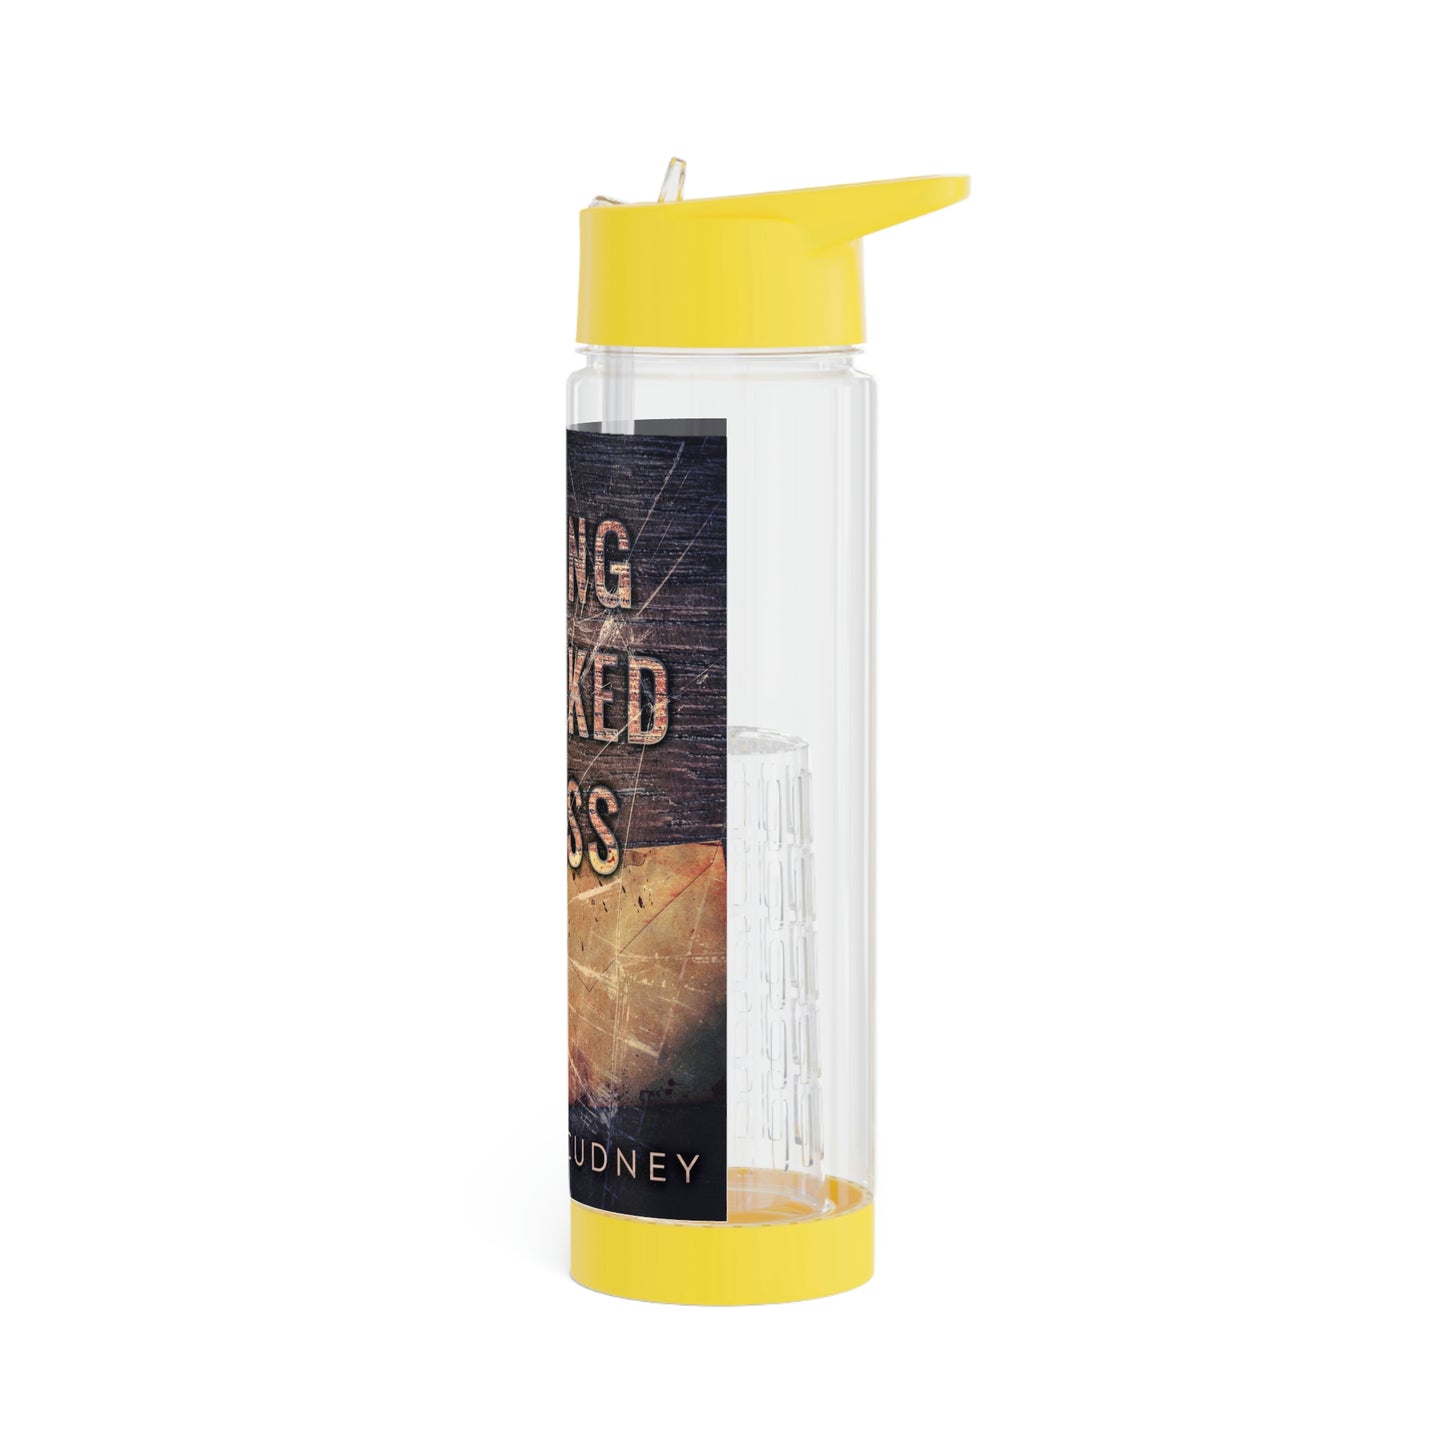 Hiding Cracked Glass - Infuser Water Bottle